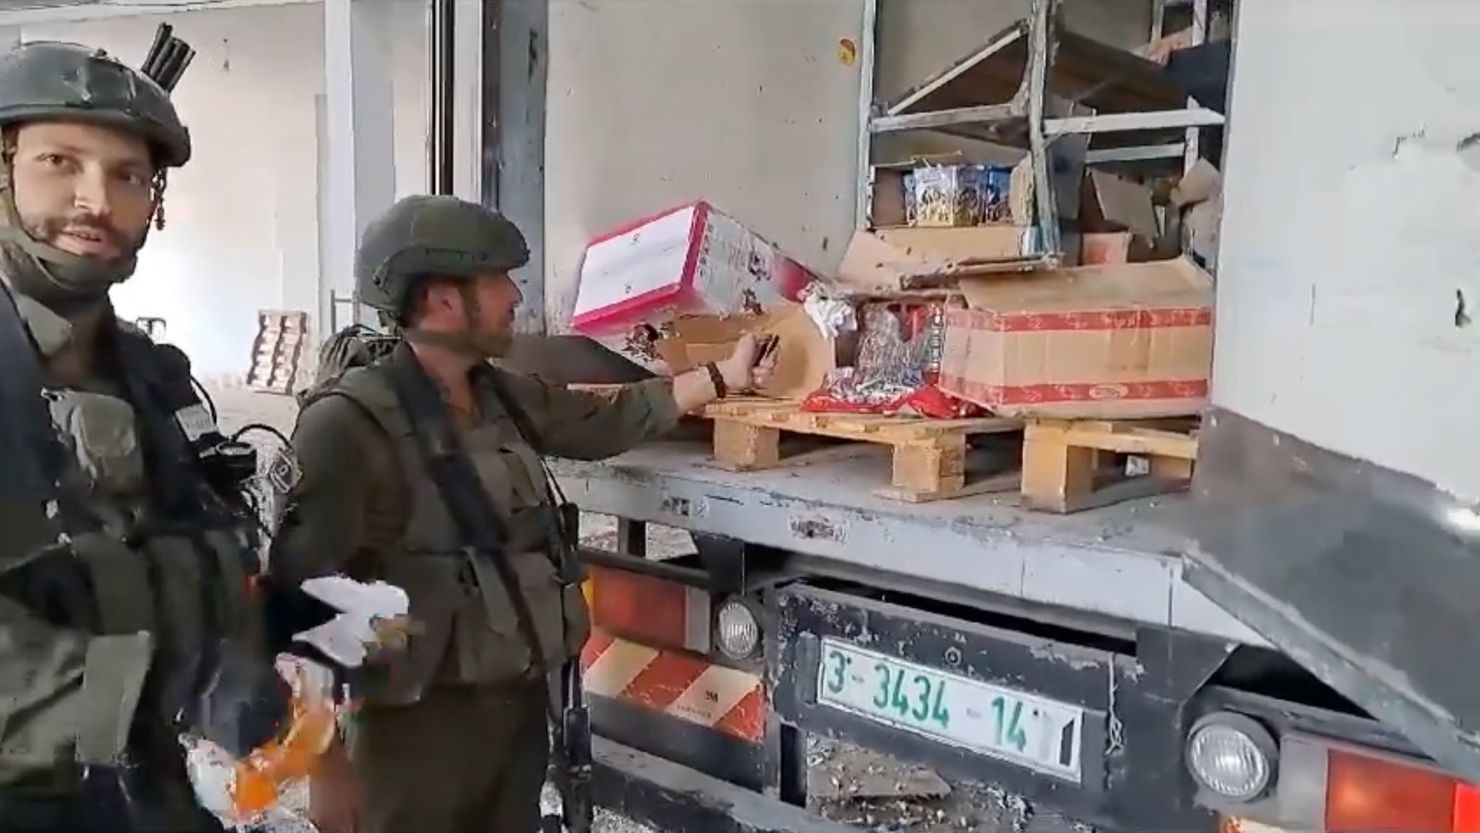 Videos show Israeli soldiers in Gaza burning food, vandalizing a shop and  ransacking private homes